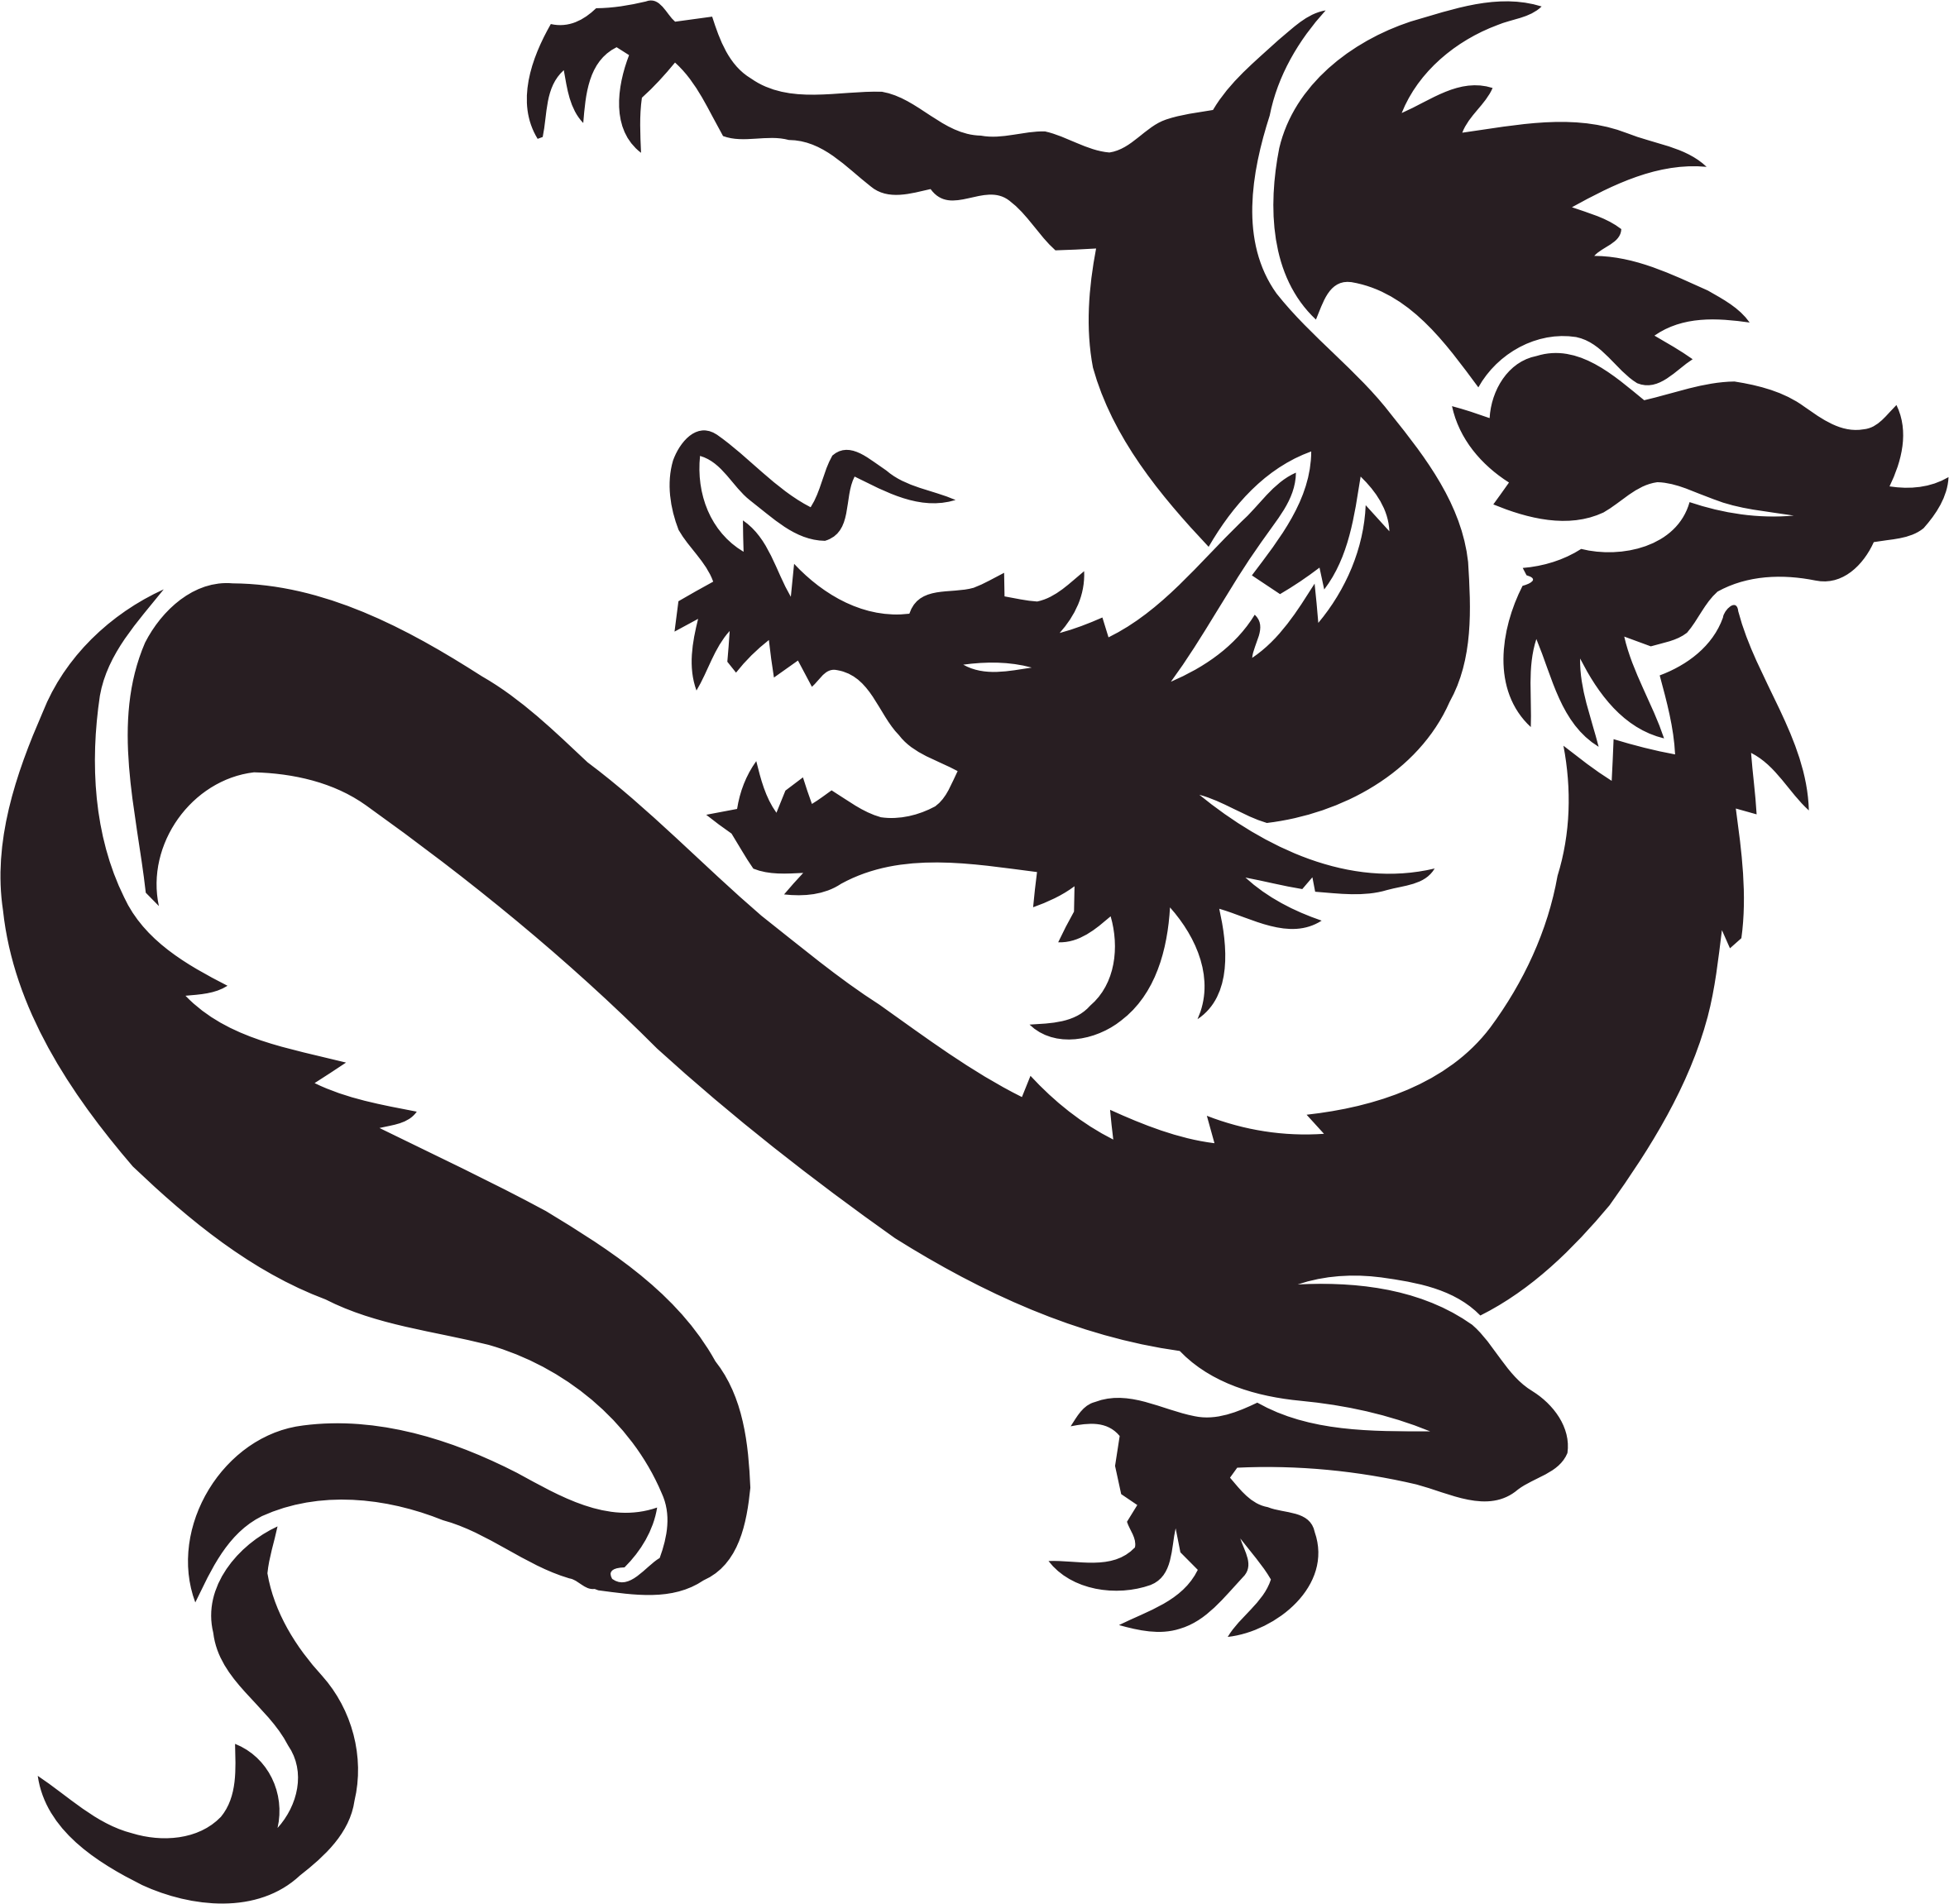 Fist Free Vector Download For Commercial Use - Small Japanese Dragon Tattoo (2356x2302)